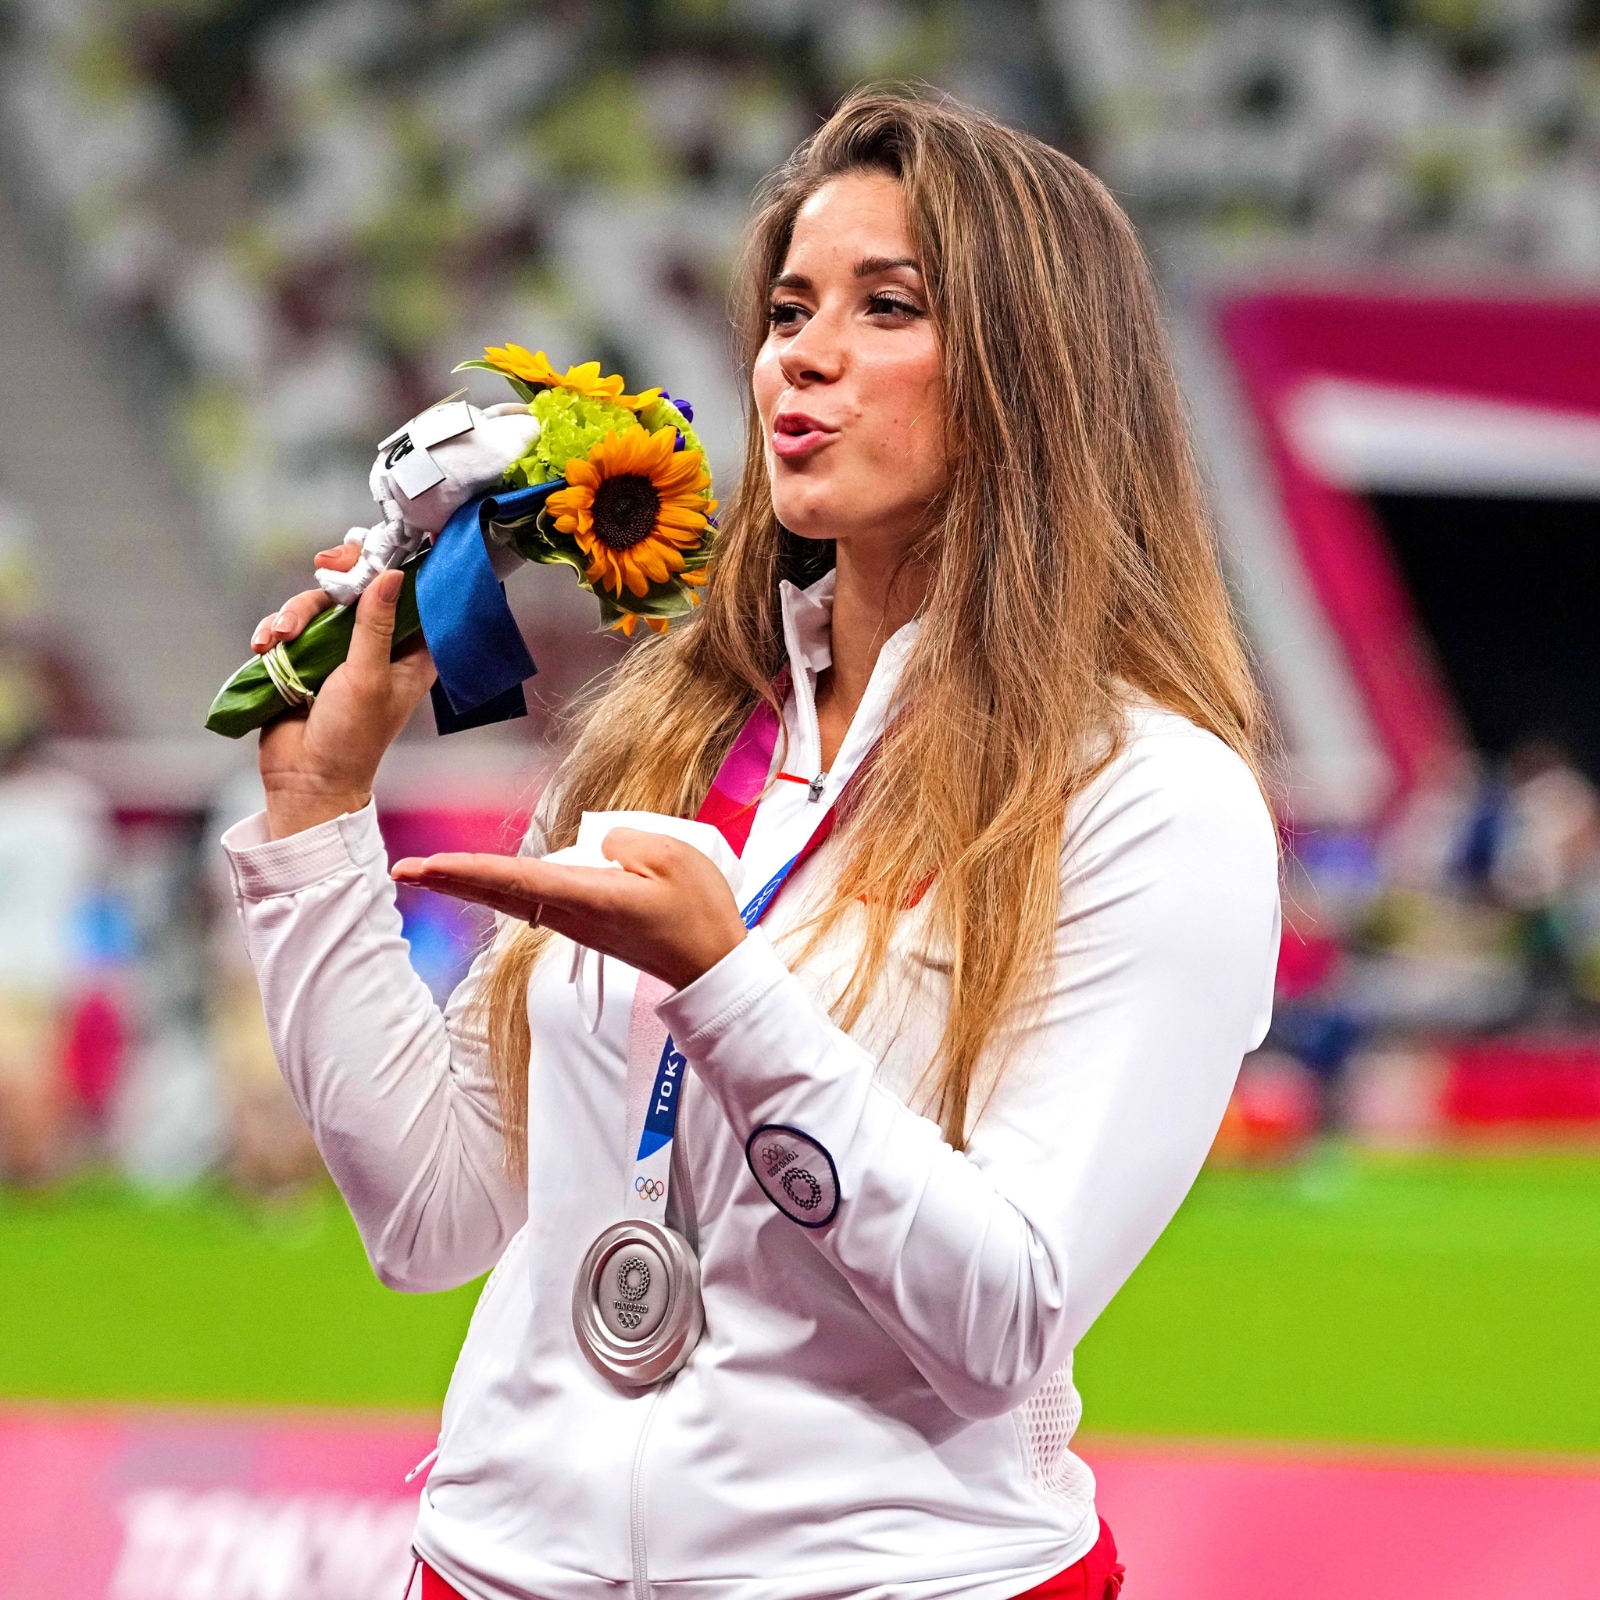 Olympian auctions off her silver medal to raise funds